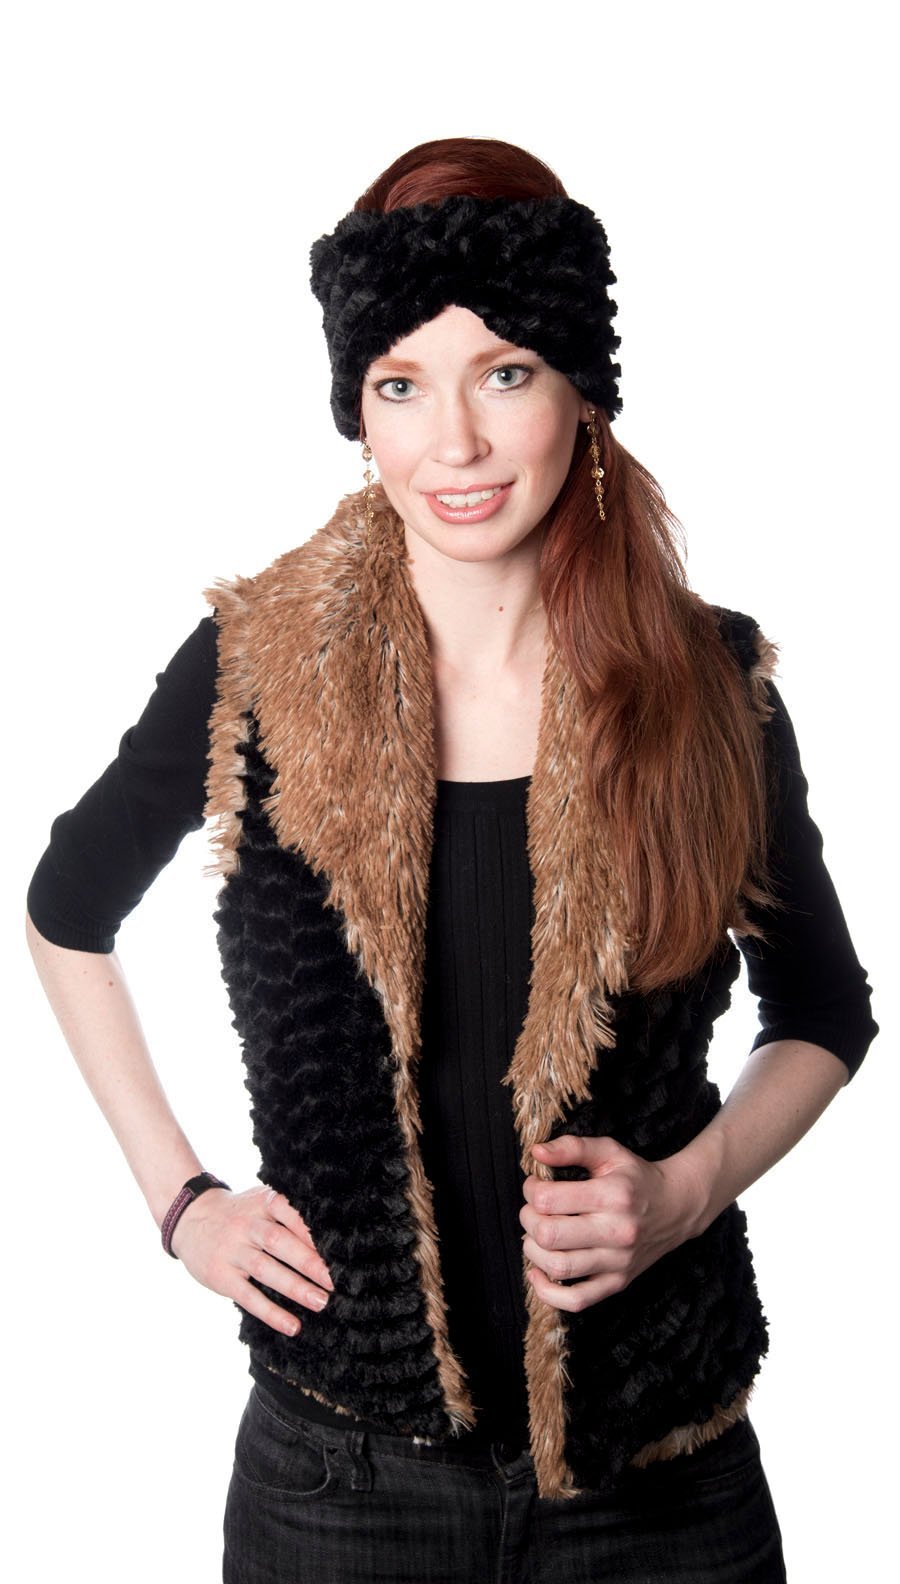 Modeling with Faux Fur Headband wearing Shawl Collar Vest | Desert Sand in Midnight Faux Fur with Red Fox Long Hair Faux Fur | Handmade by Pandemonium Millinery | Seattle WA USA